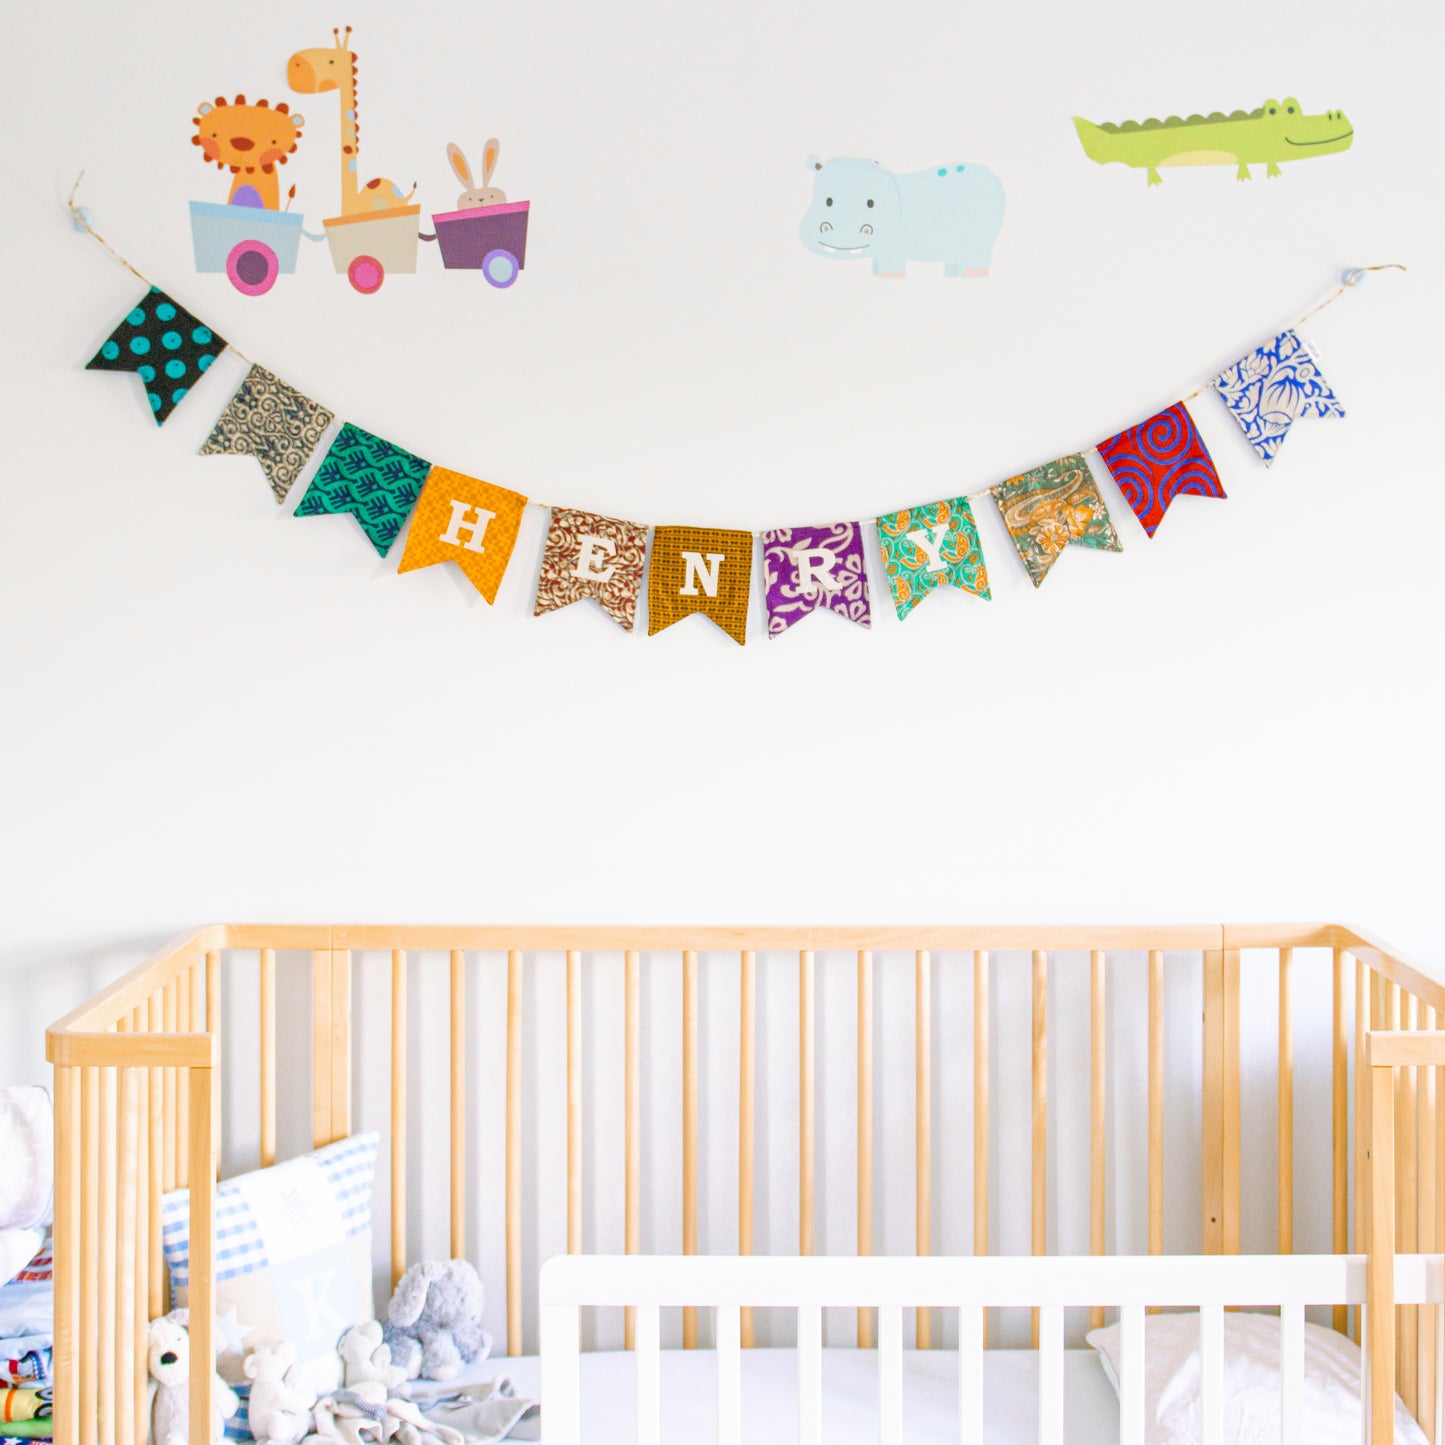 Colourful Bunting hanging above nursery